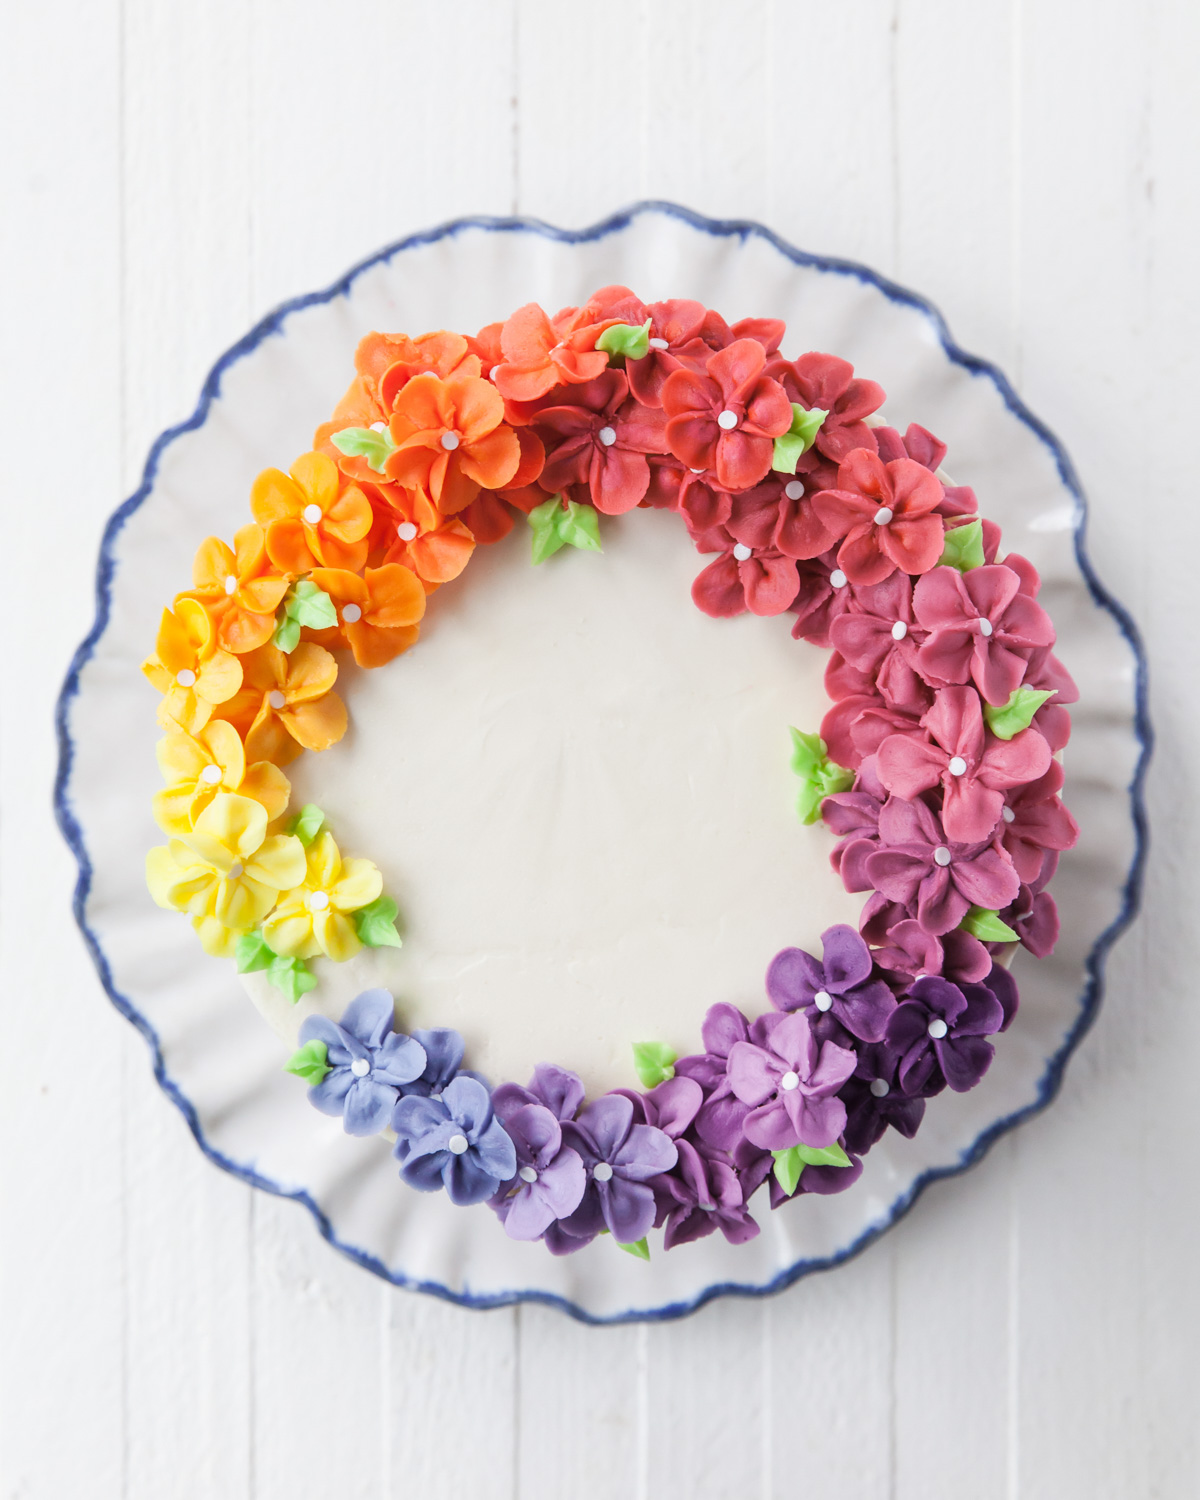 A rainbow of buttercream flowers on top of a cake